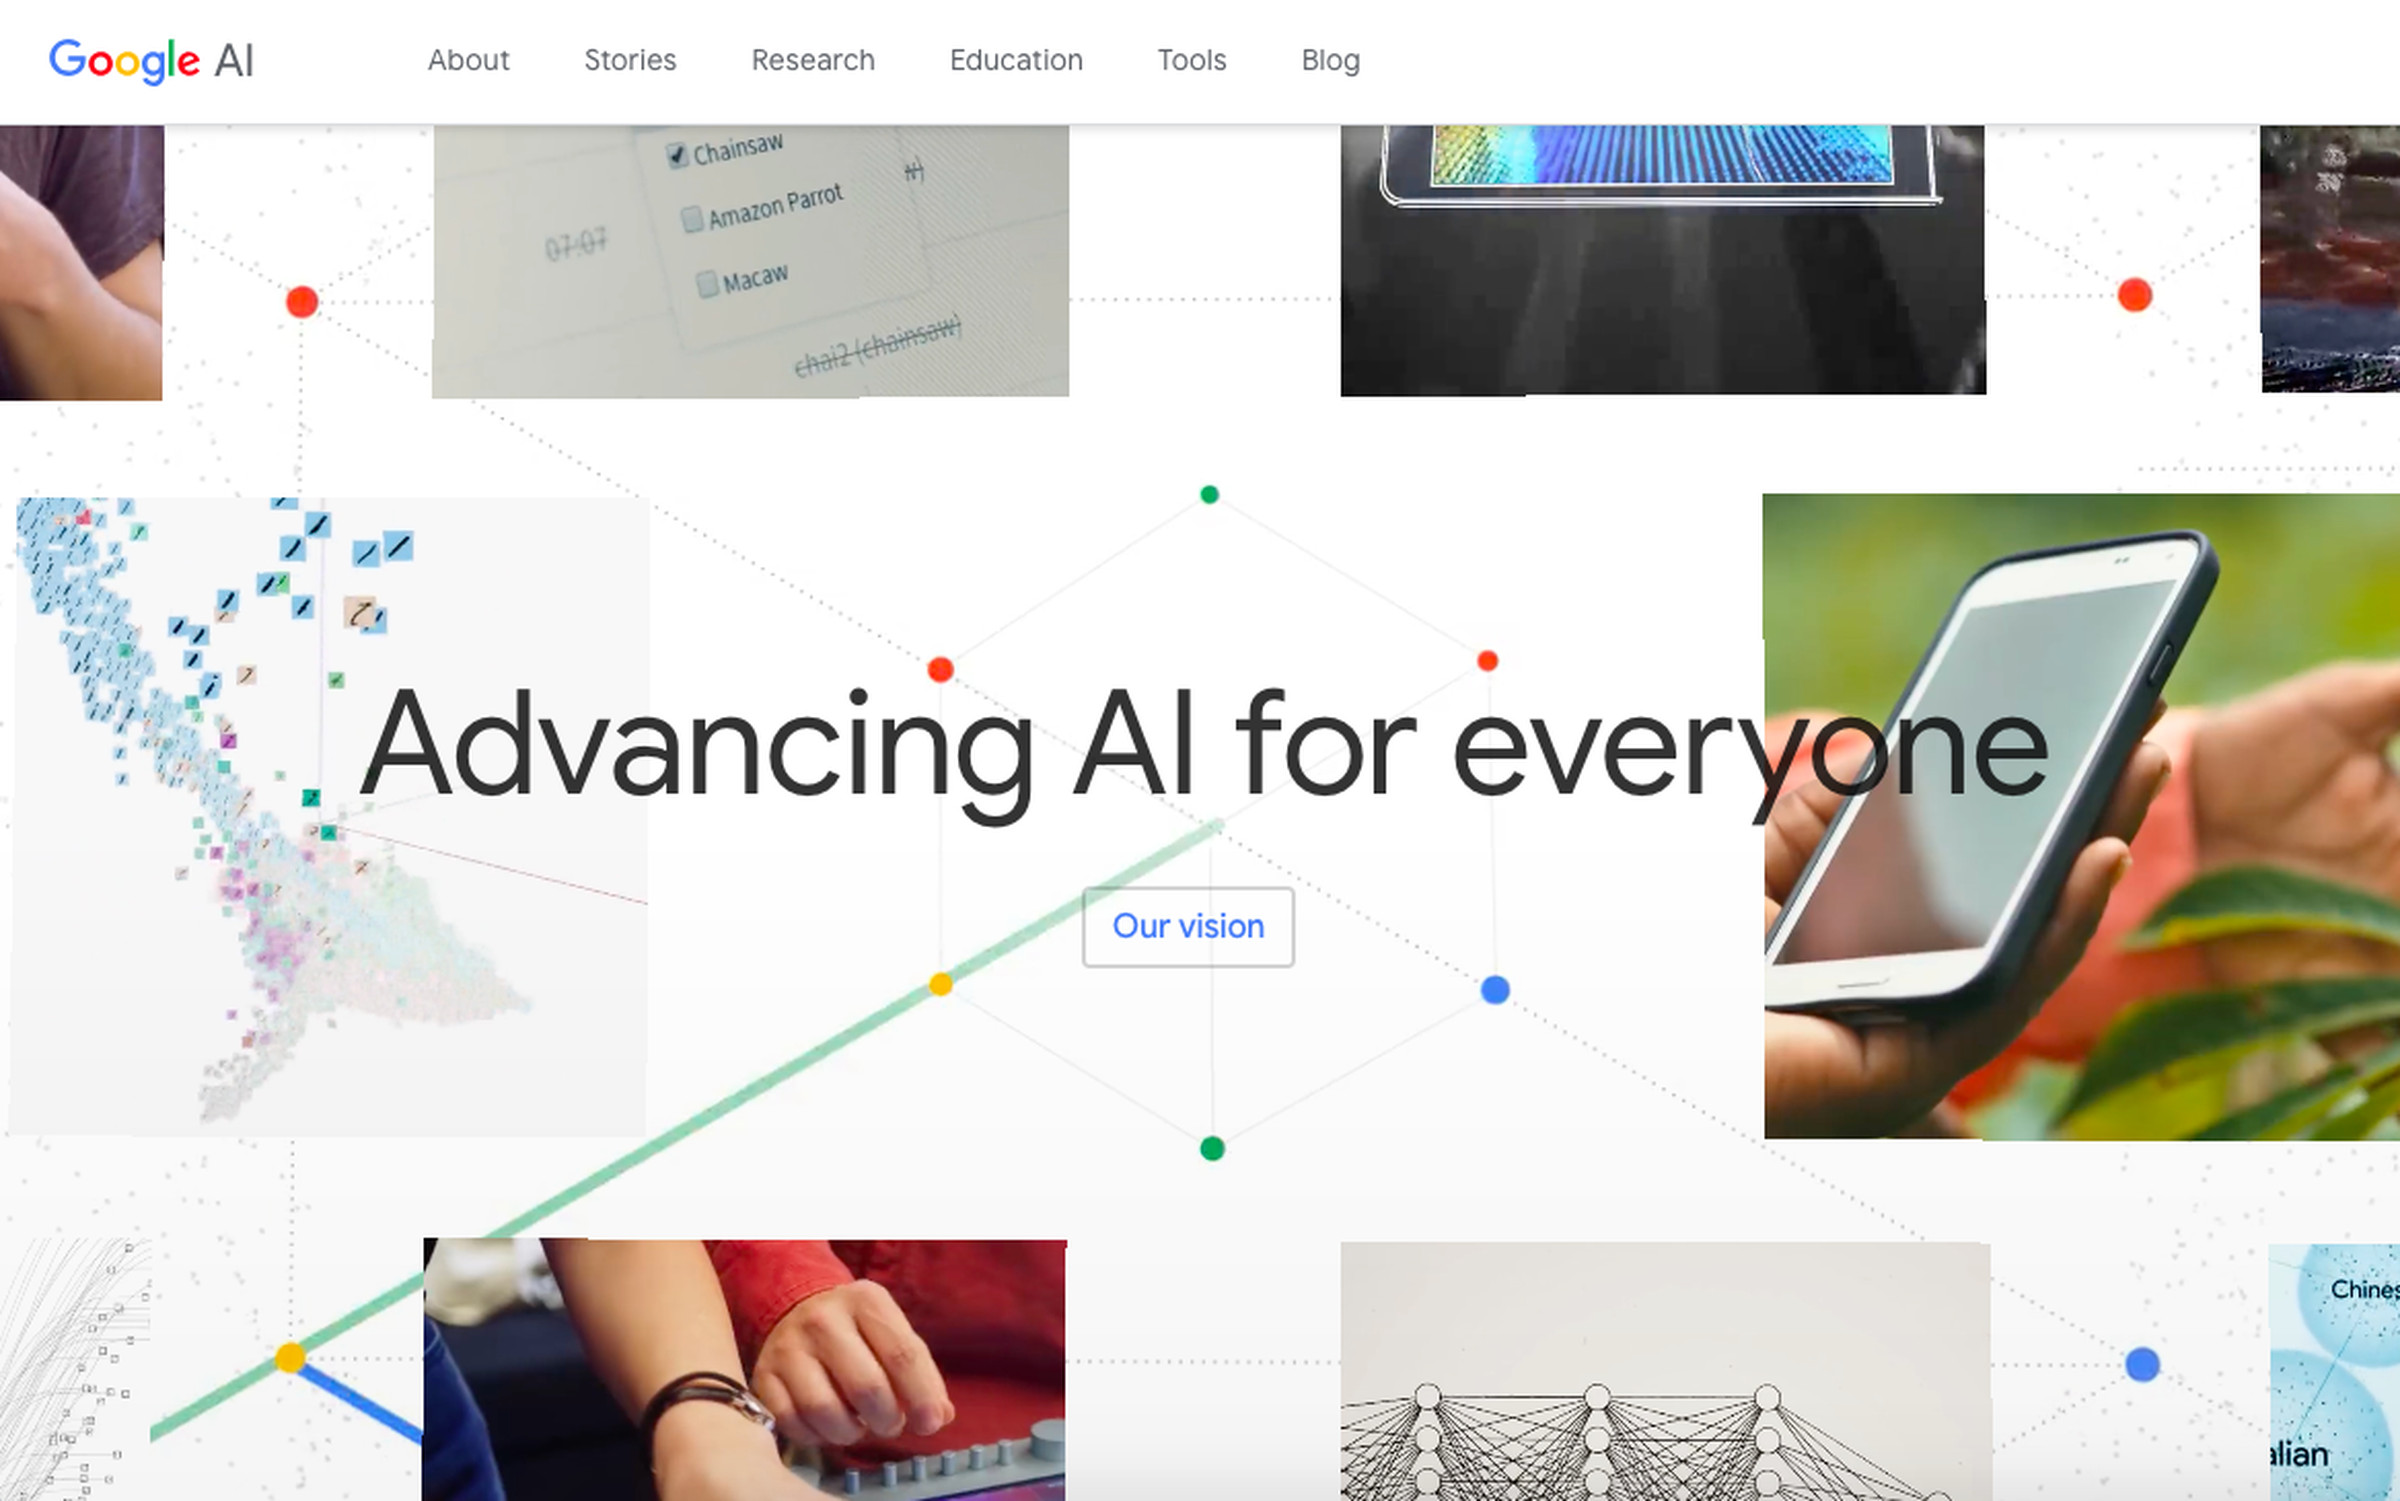 The homepage for Google AI. 